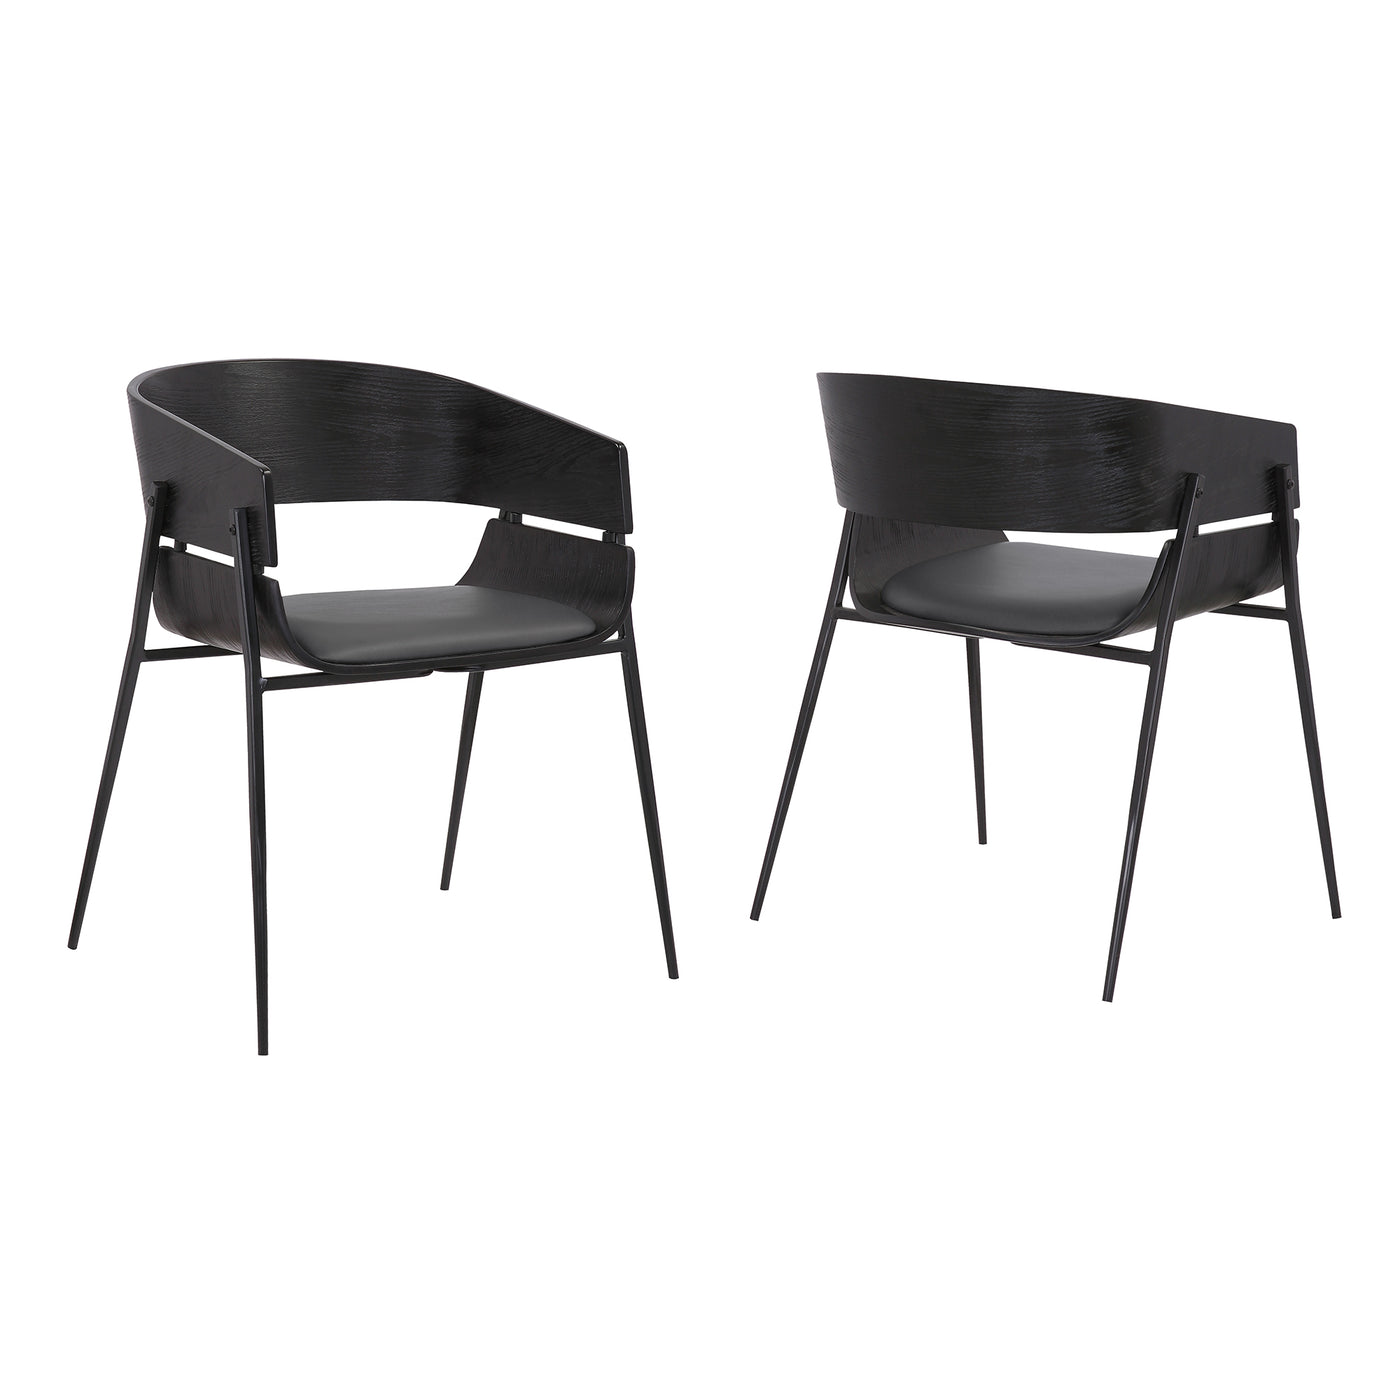 Bronte Dining Chair Set of 2